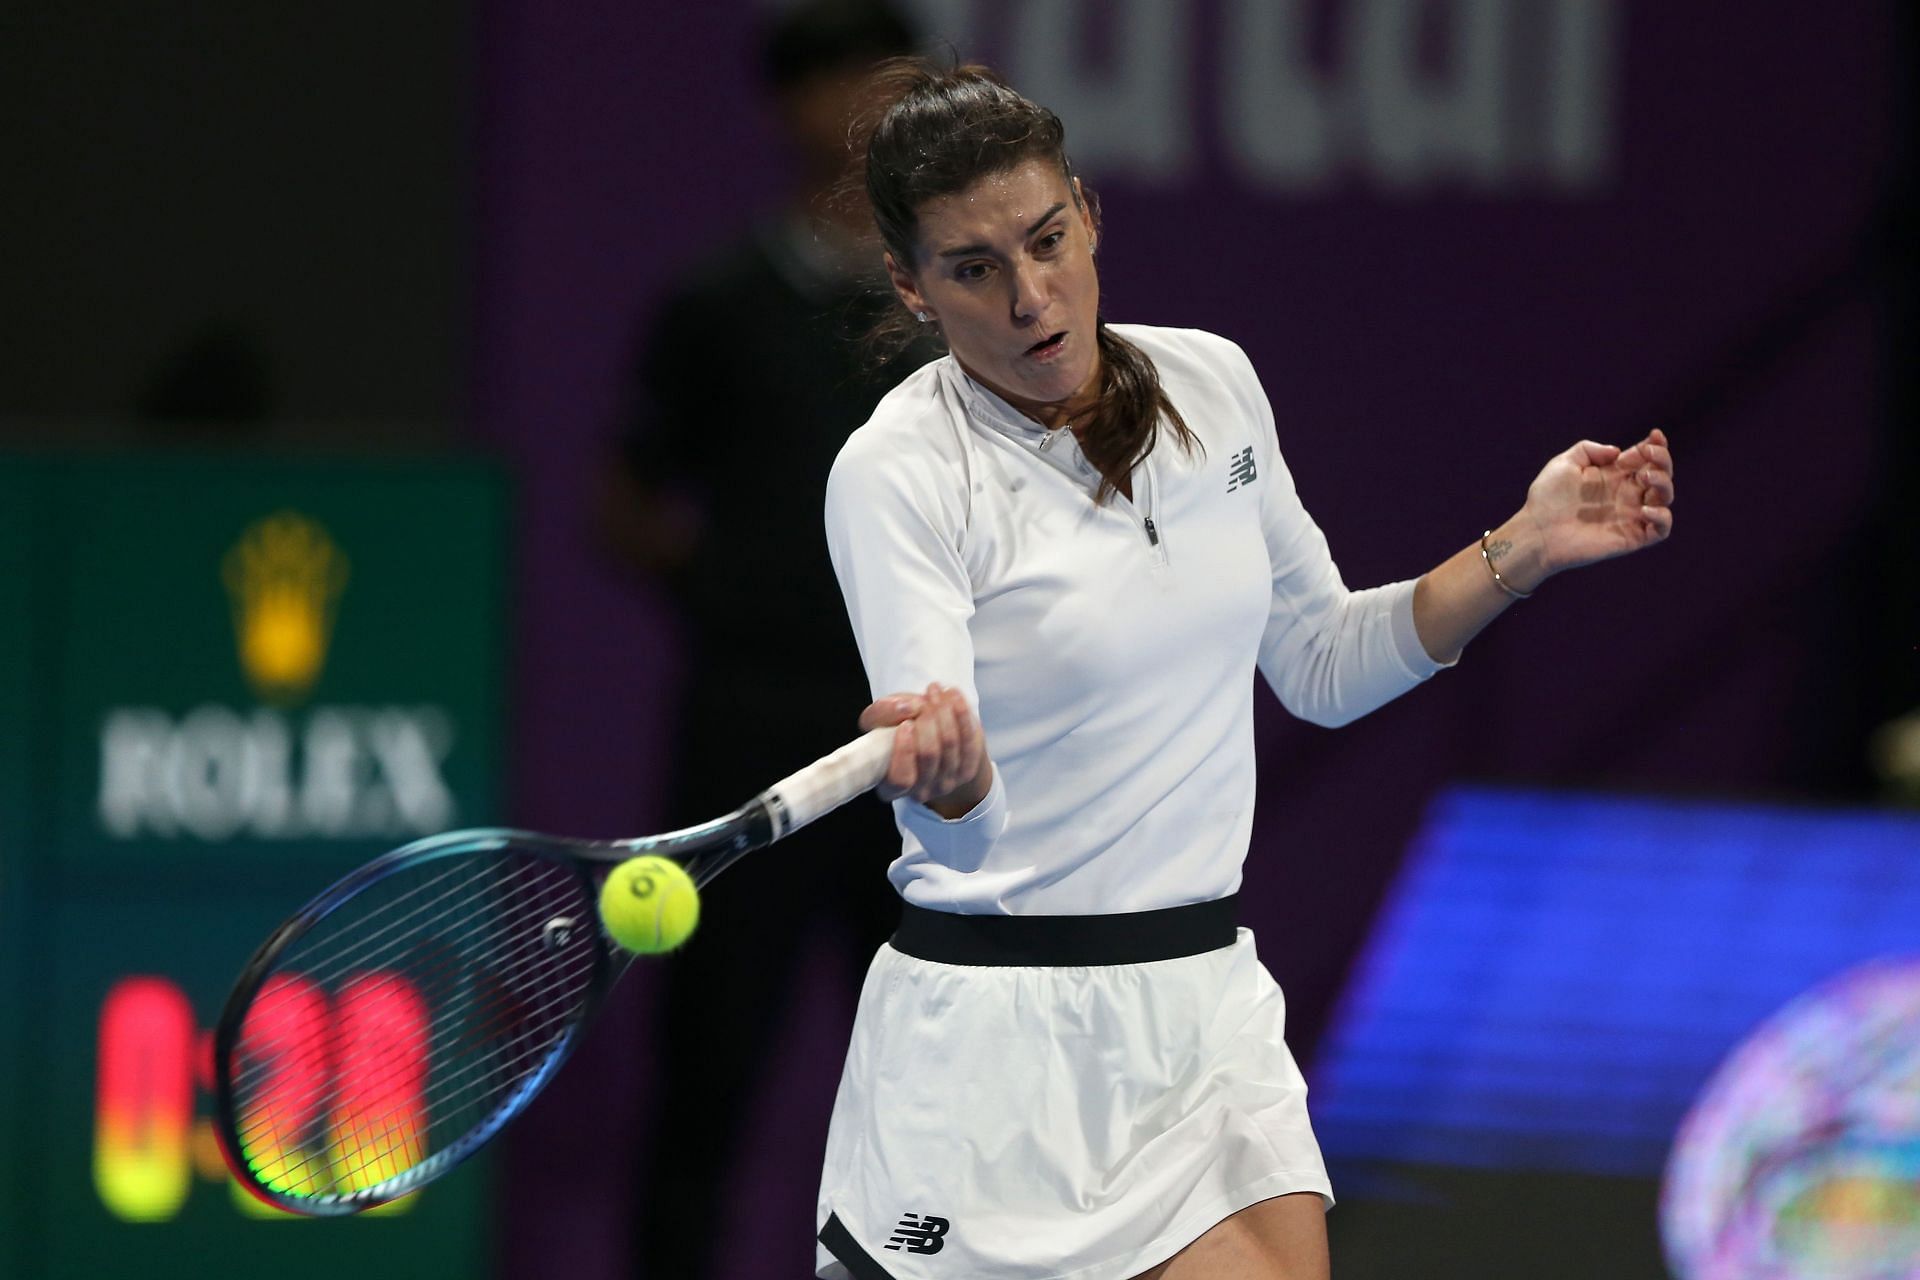 Sorana Cirstea will look to reach the third round of the Indian Wells Open